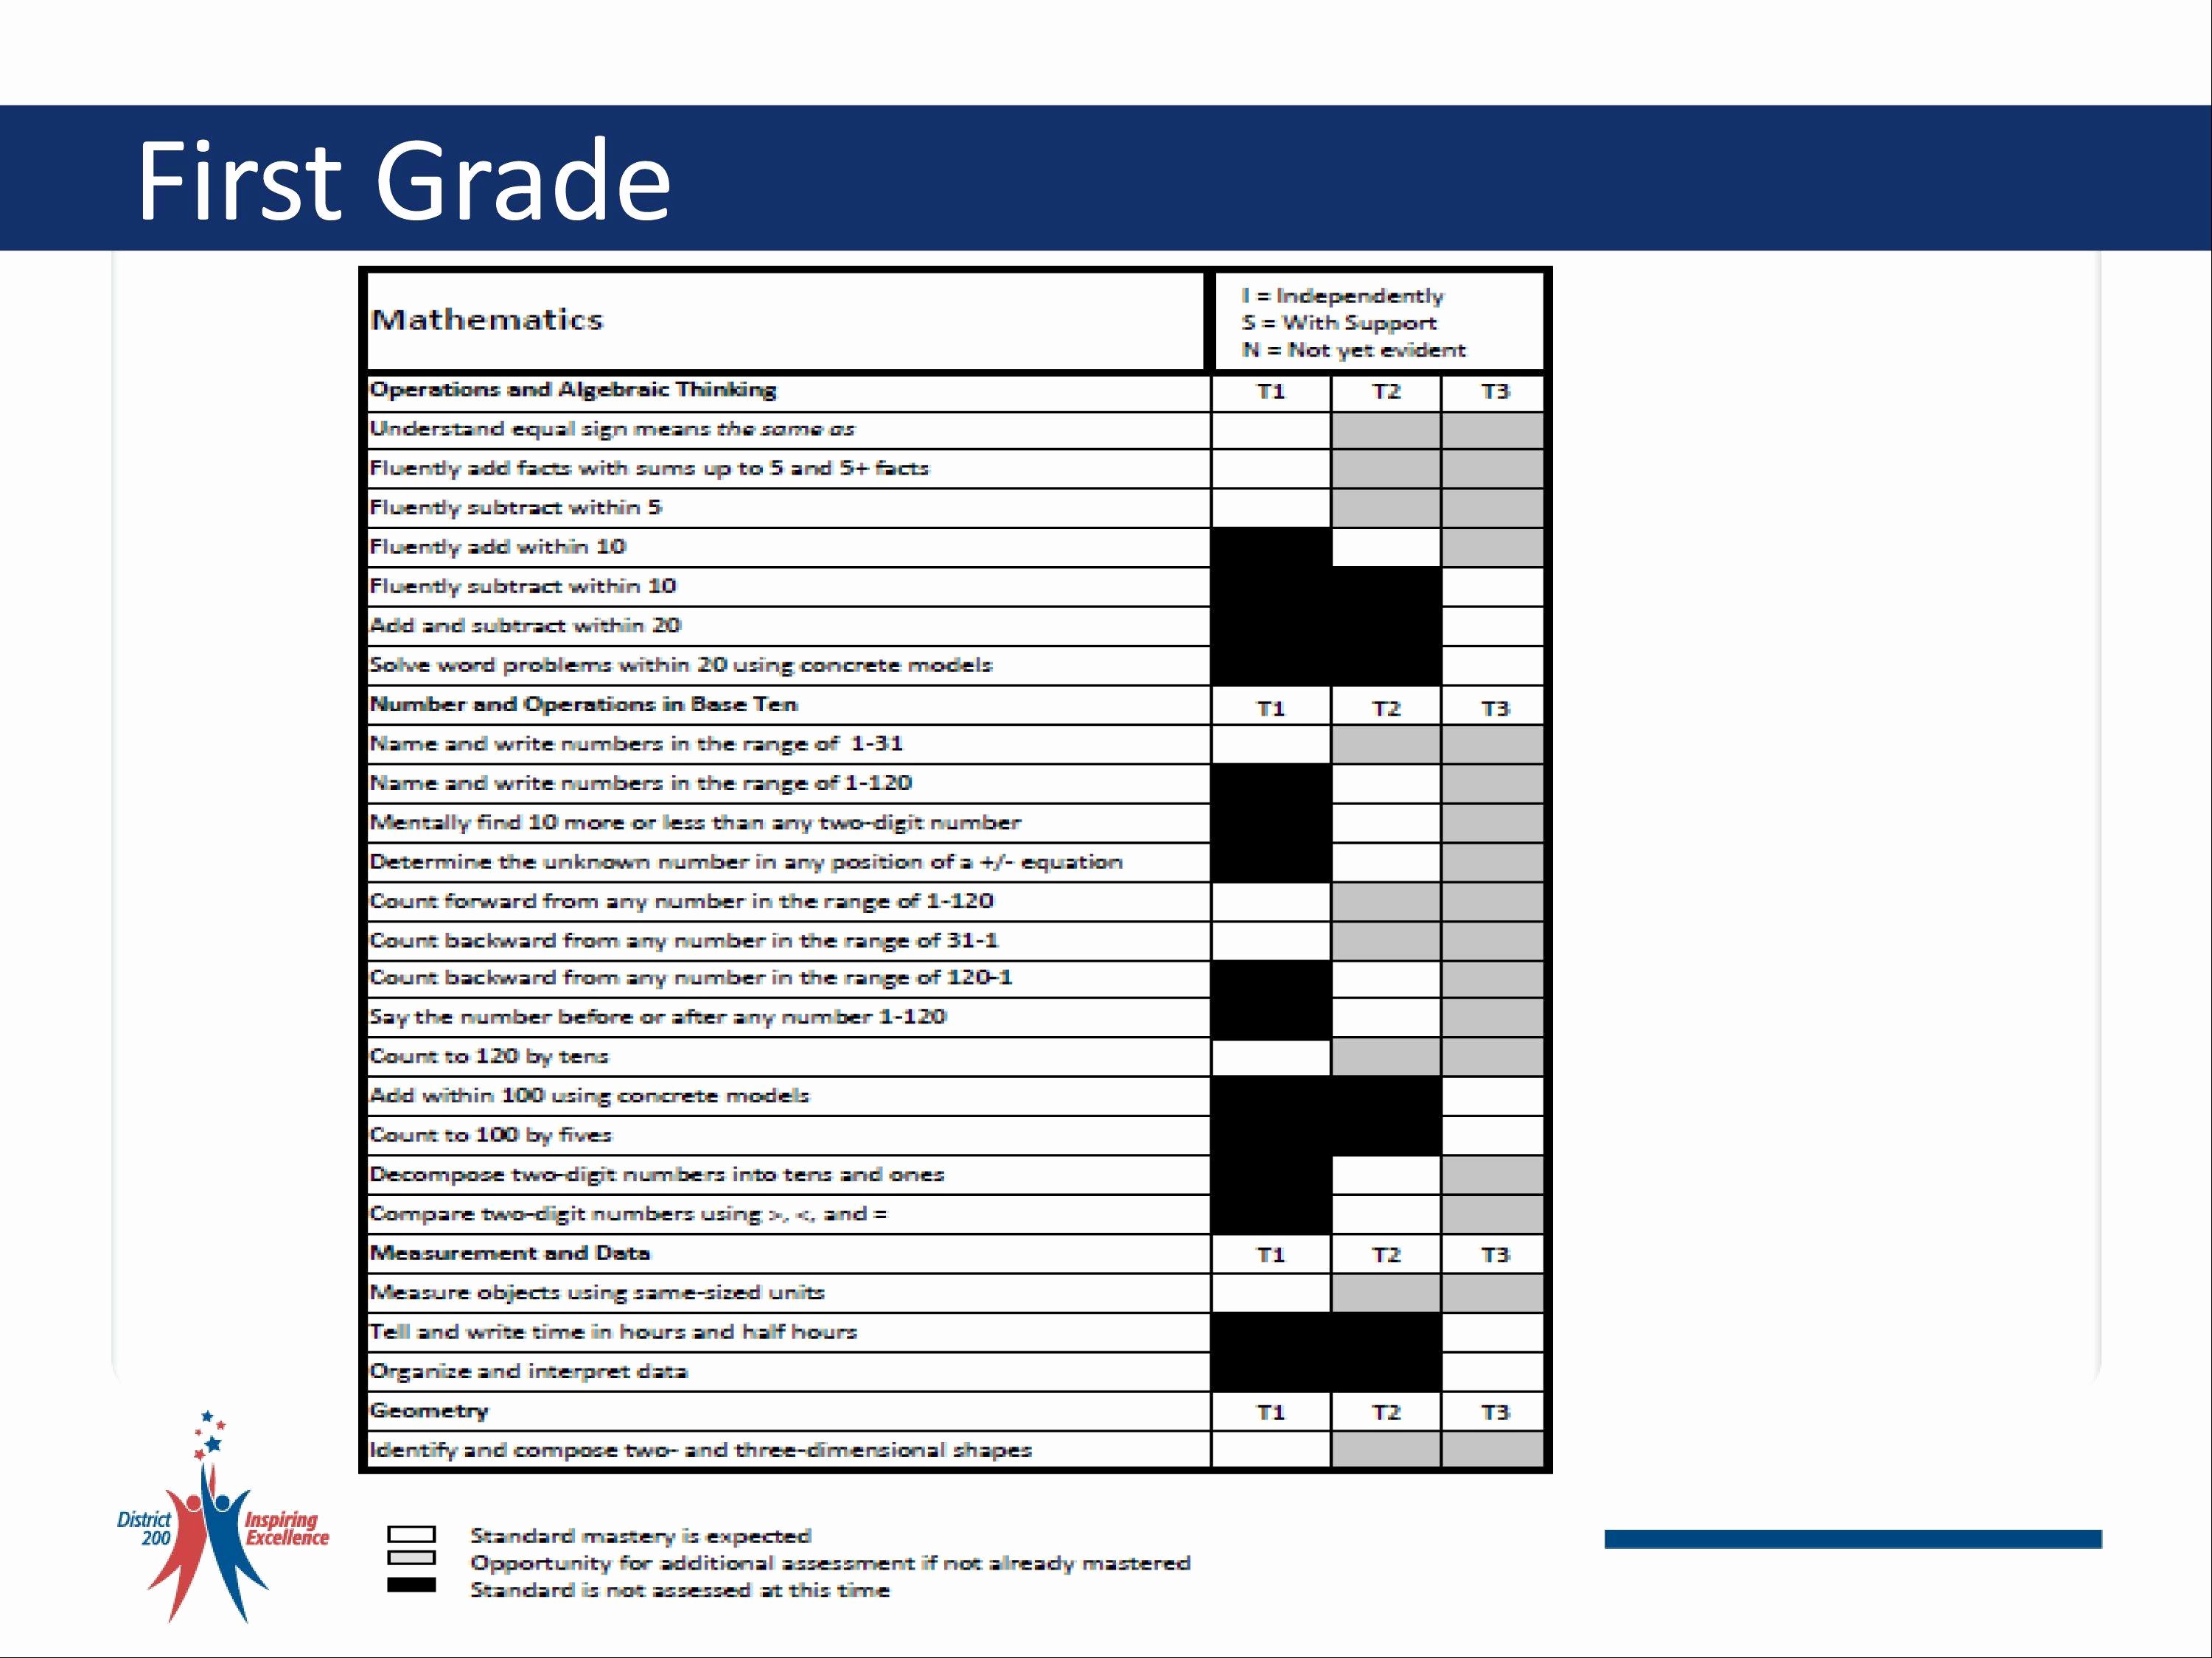 First Grade Report Card Template Luxury District 200 Unveils New Elementary School Report Card